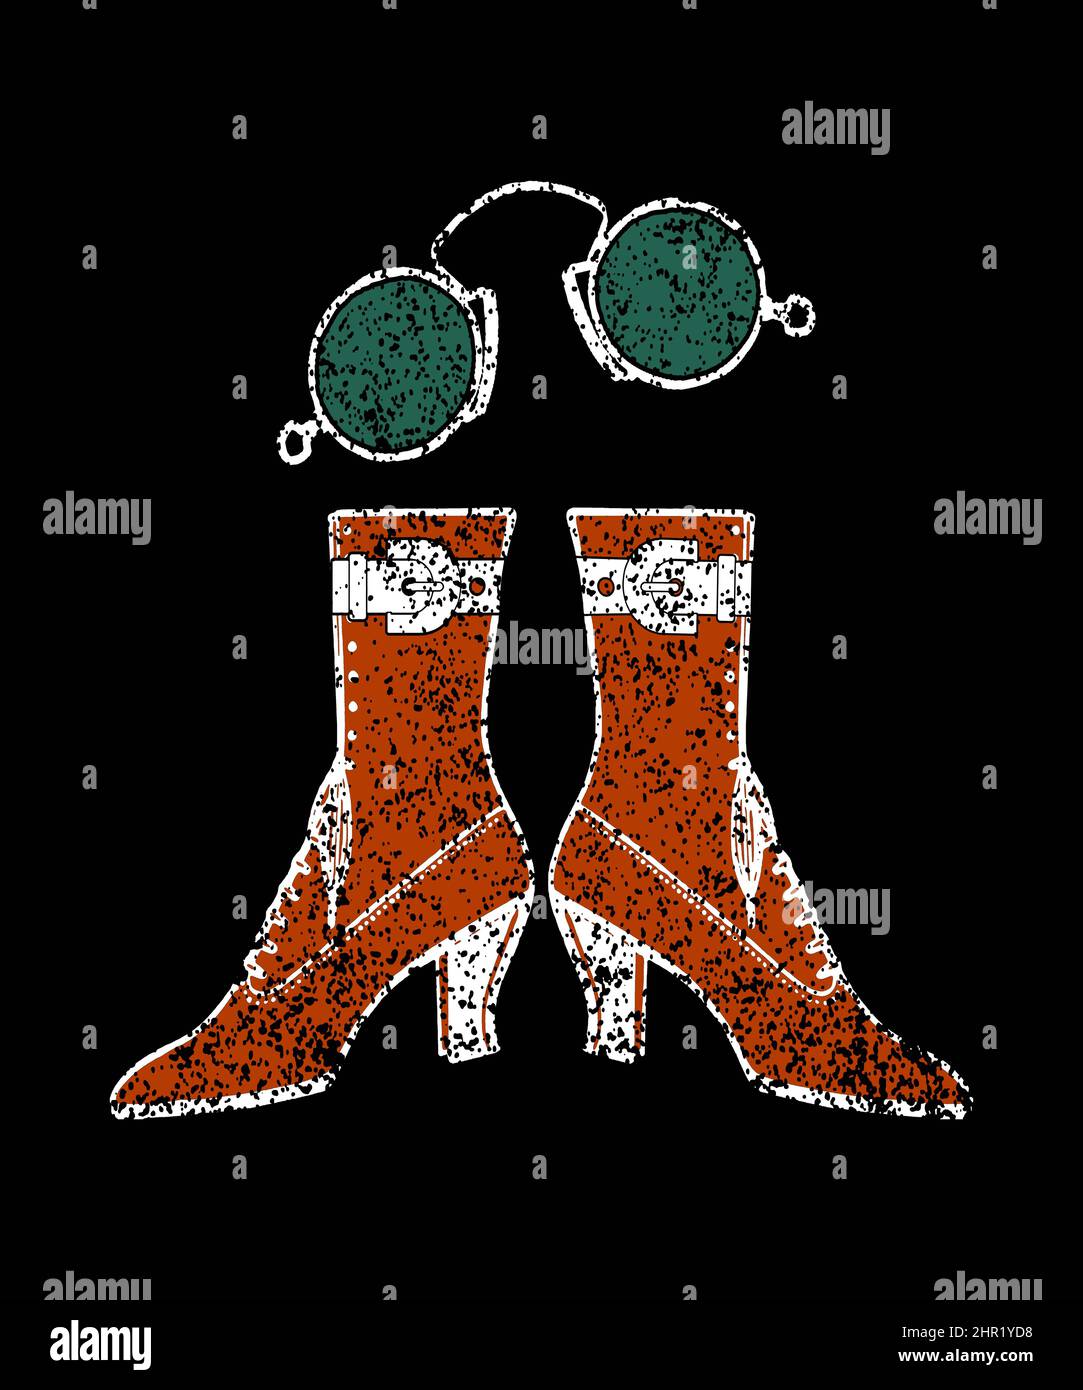 Steampunk boots and glasses graphic illustration where retro vintage meets sci fi in a grunge design on black background. Stock Photo